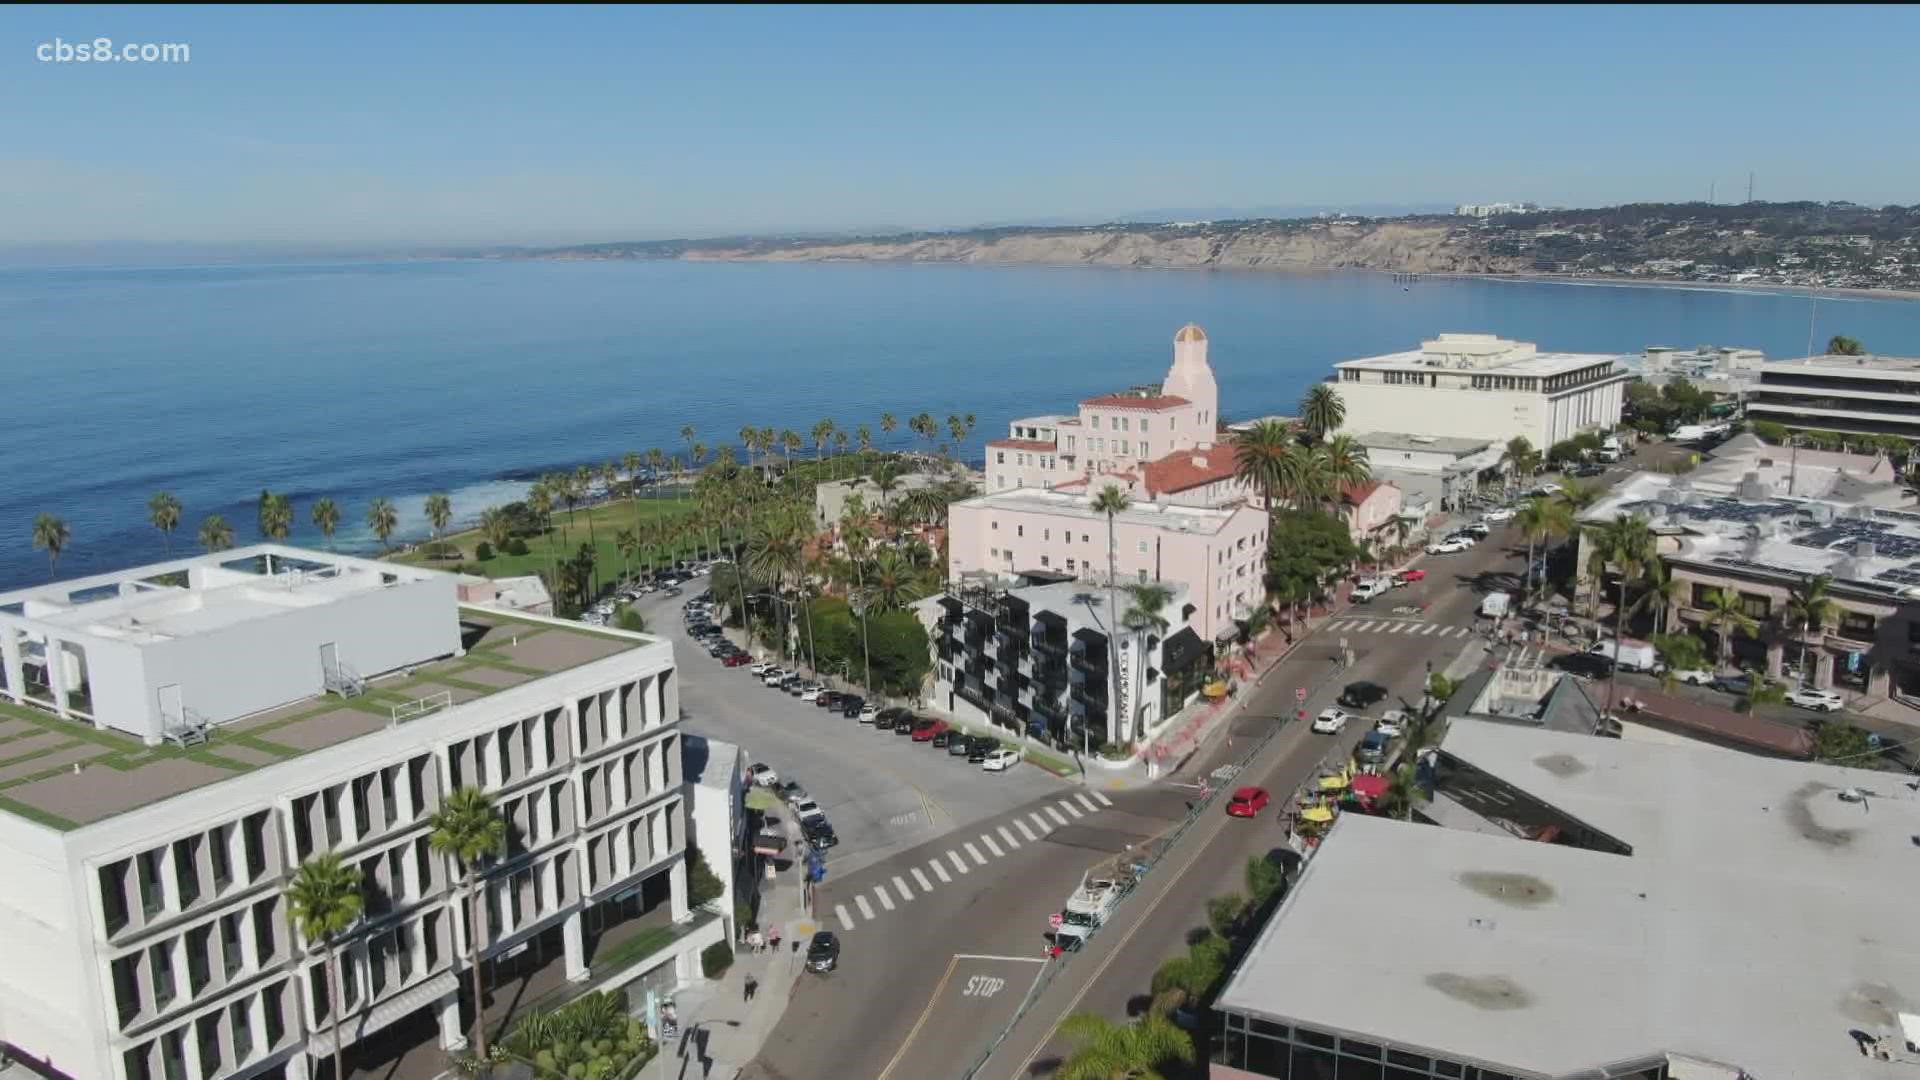 News 8 looks into the history of La Jolla and what it's like today. We revisit Harry's Coffee Shop, housing and more of 'the jewel' as featured in the 1970s & '80s.